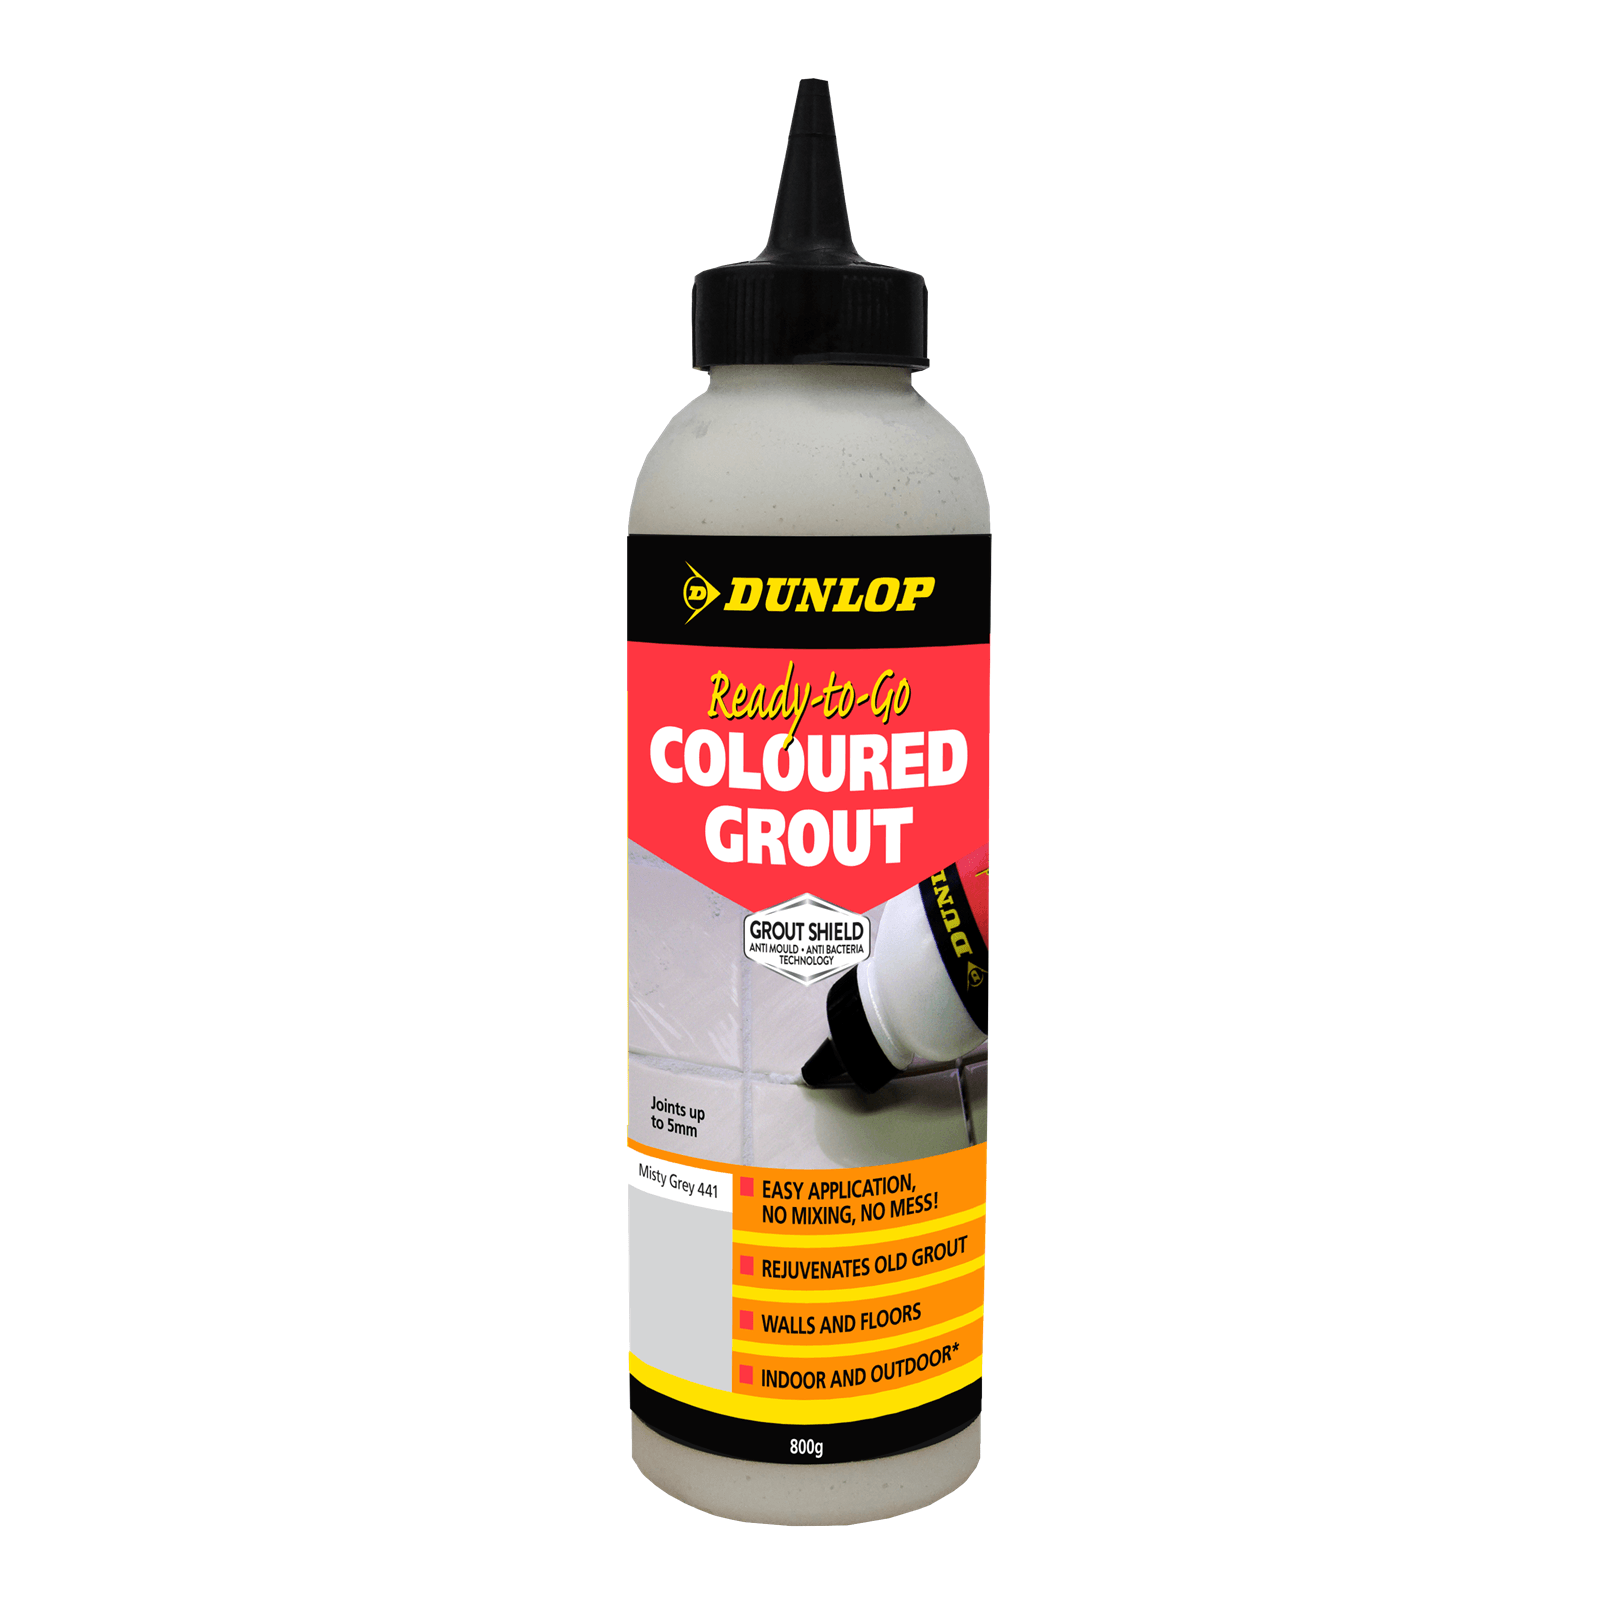 DUNLOP Ready-to-go Coloured Grout 800g White 11255 - Double Bay Hardware